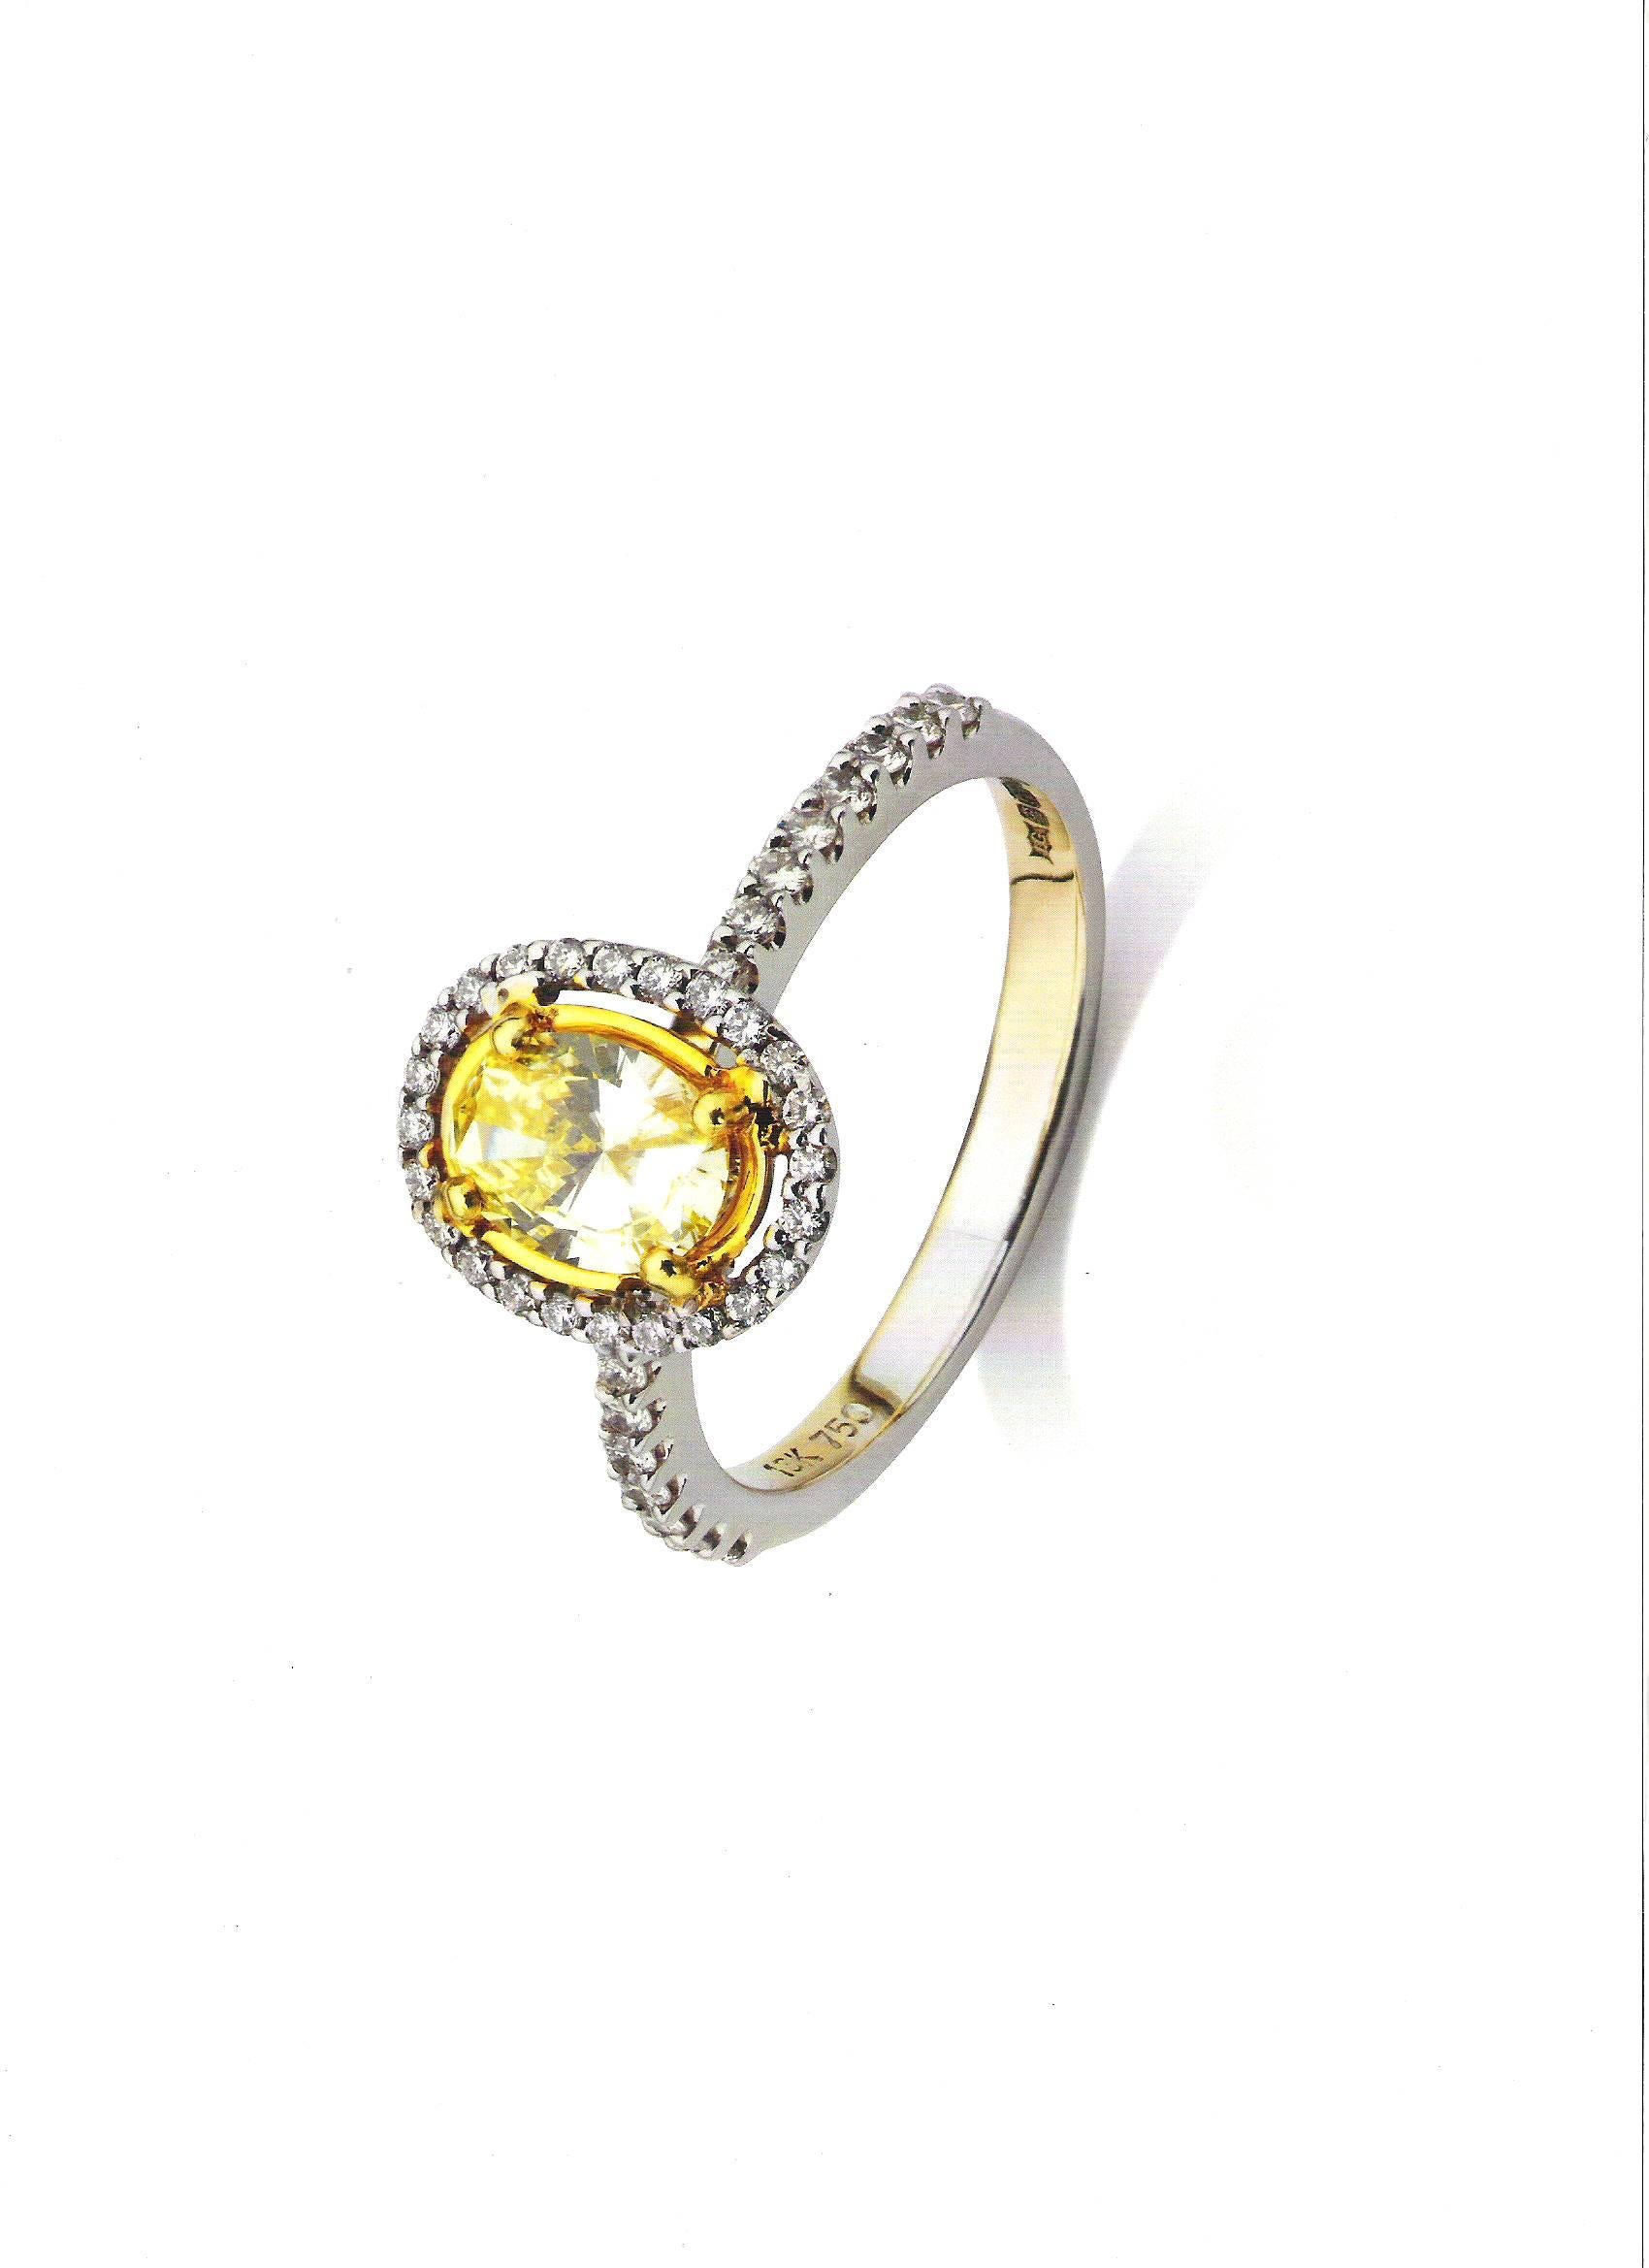 Comprising an IGI Certified, 0.63 Carat, Fancy Yellow, Oval cut centre stone – Set in 18 Carat White Gold with 40 individual brilliant diamonds totalling 0.20 carats.

Total diamond weight = 0.83 carats.

Perfect as an engagement ring or as a